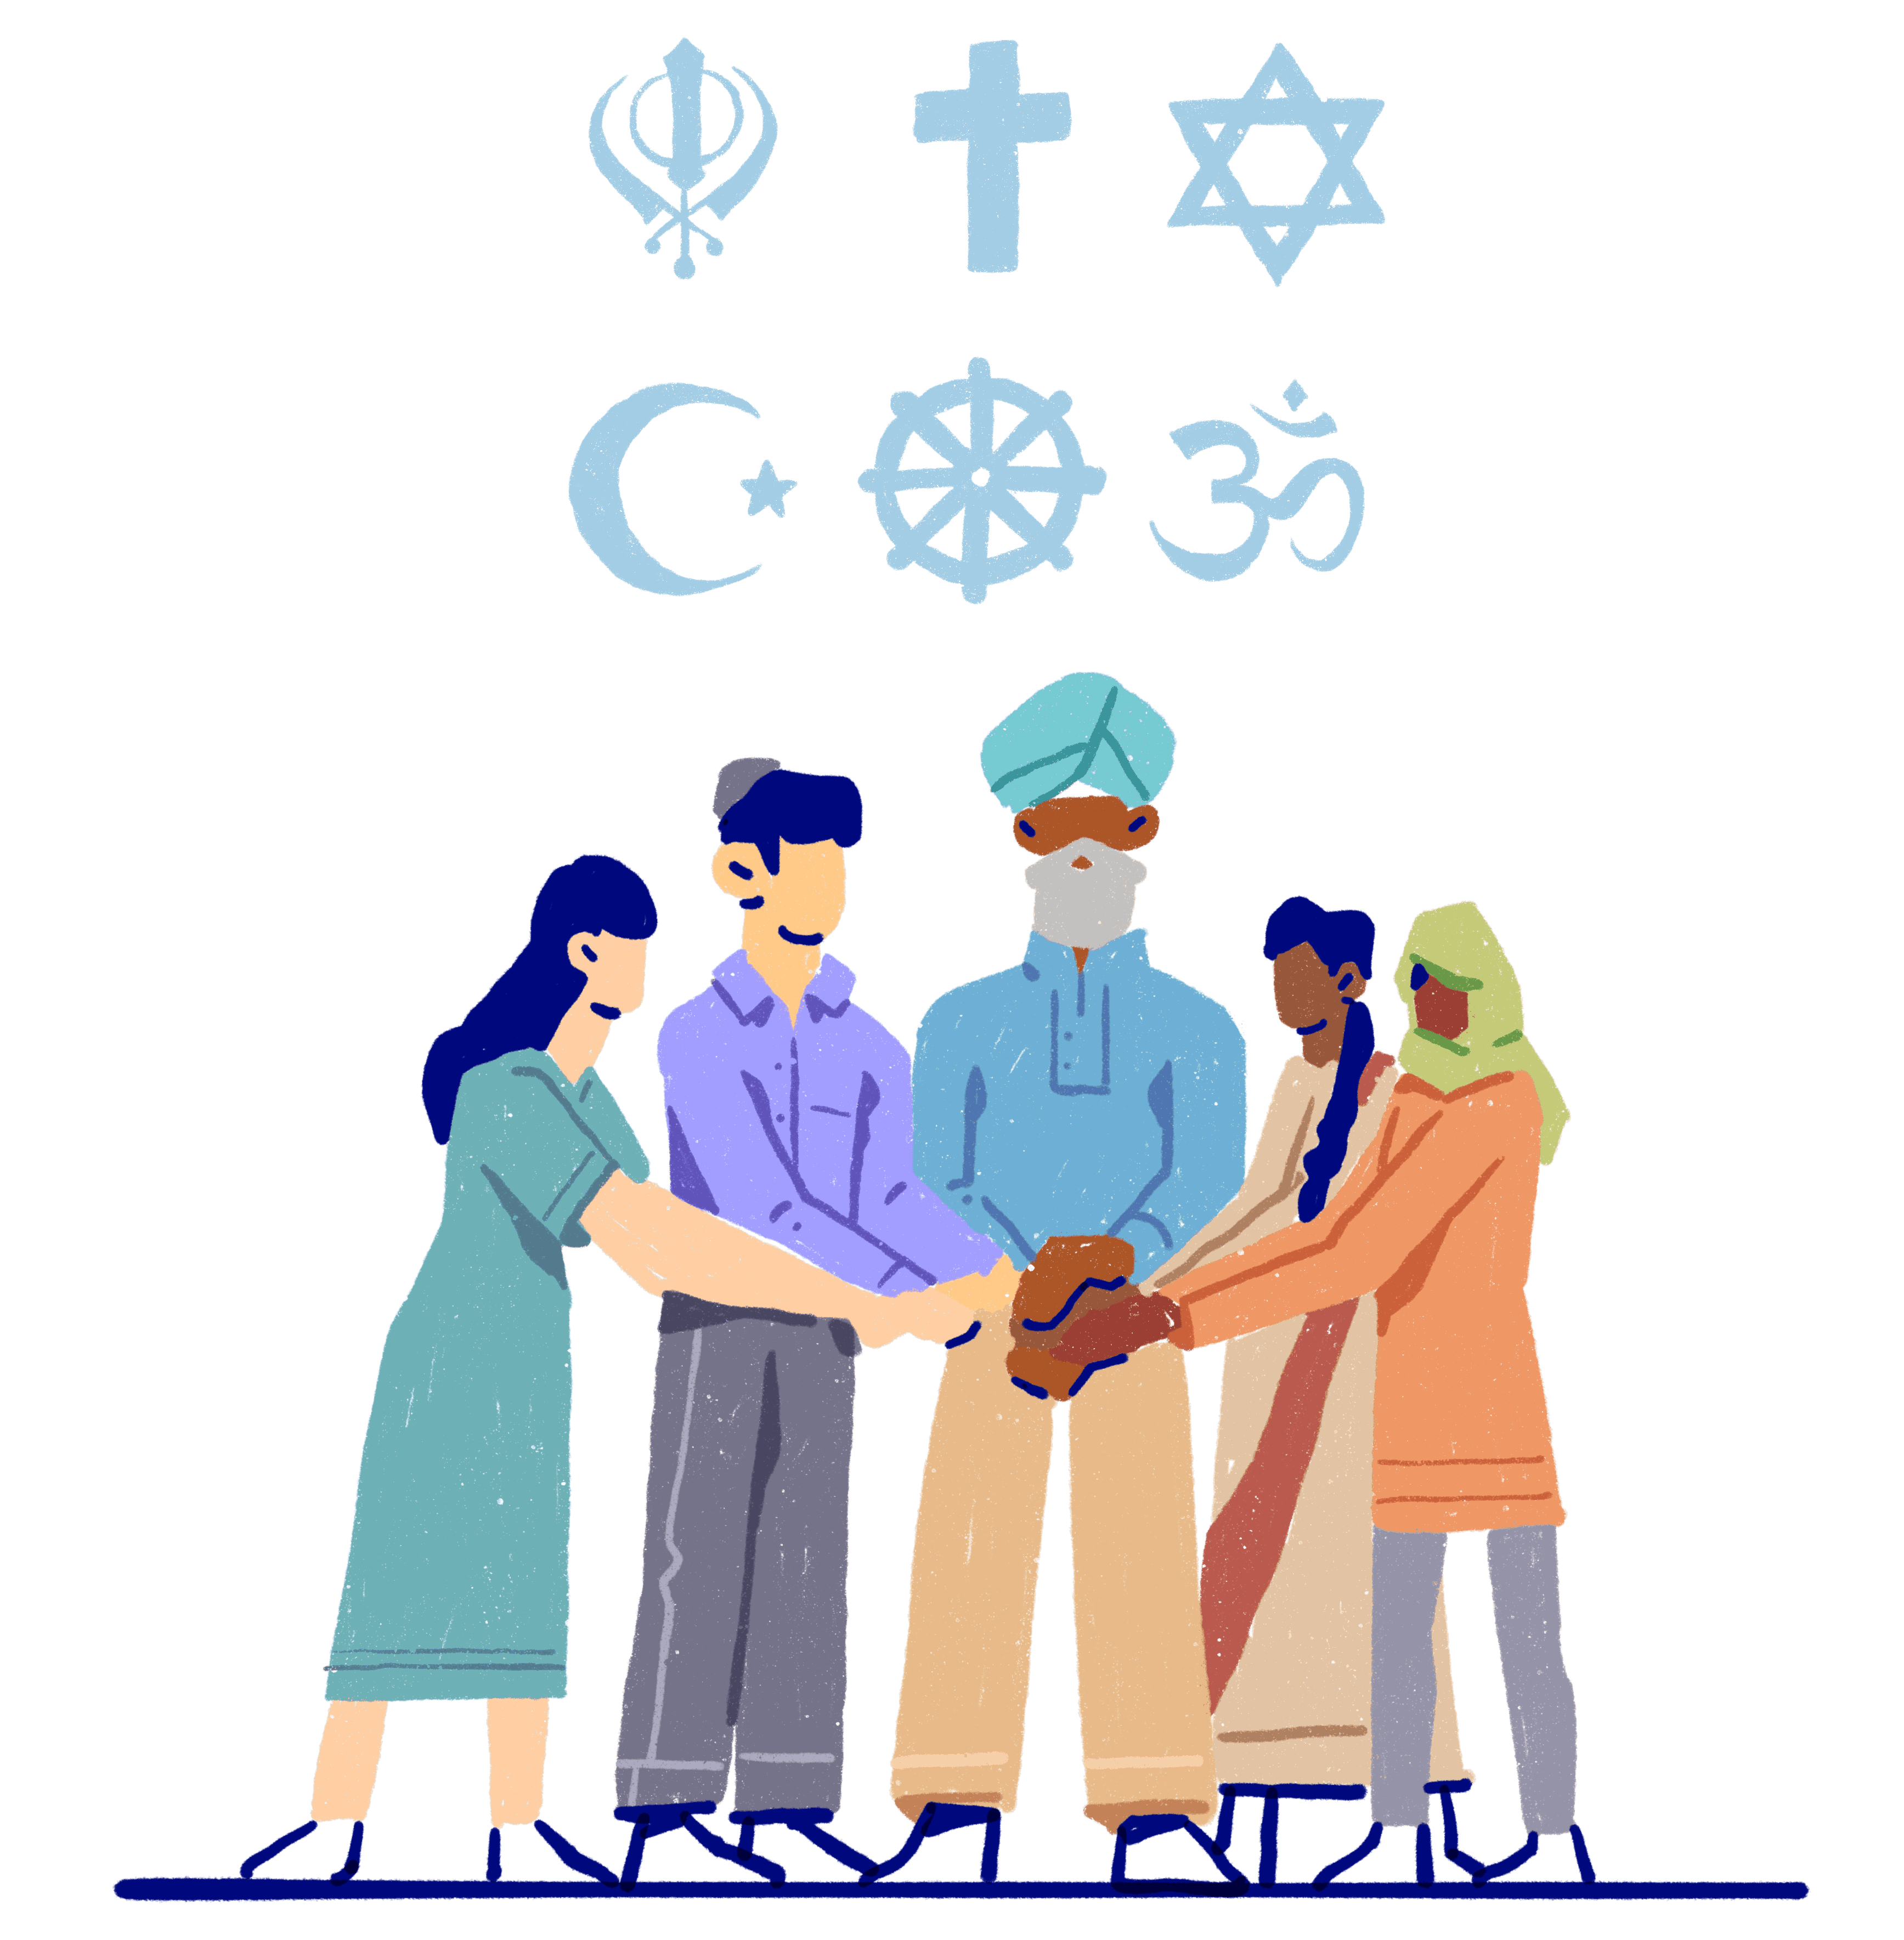 Symbols representing Sikhism, Christianity, Judaism, Islam, Hinduism and Buddhism above a group of people from different faiths linking hands